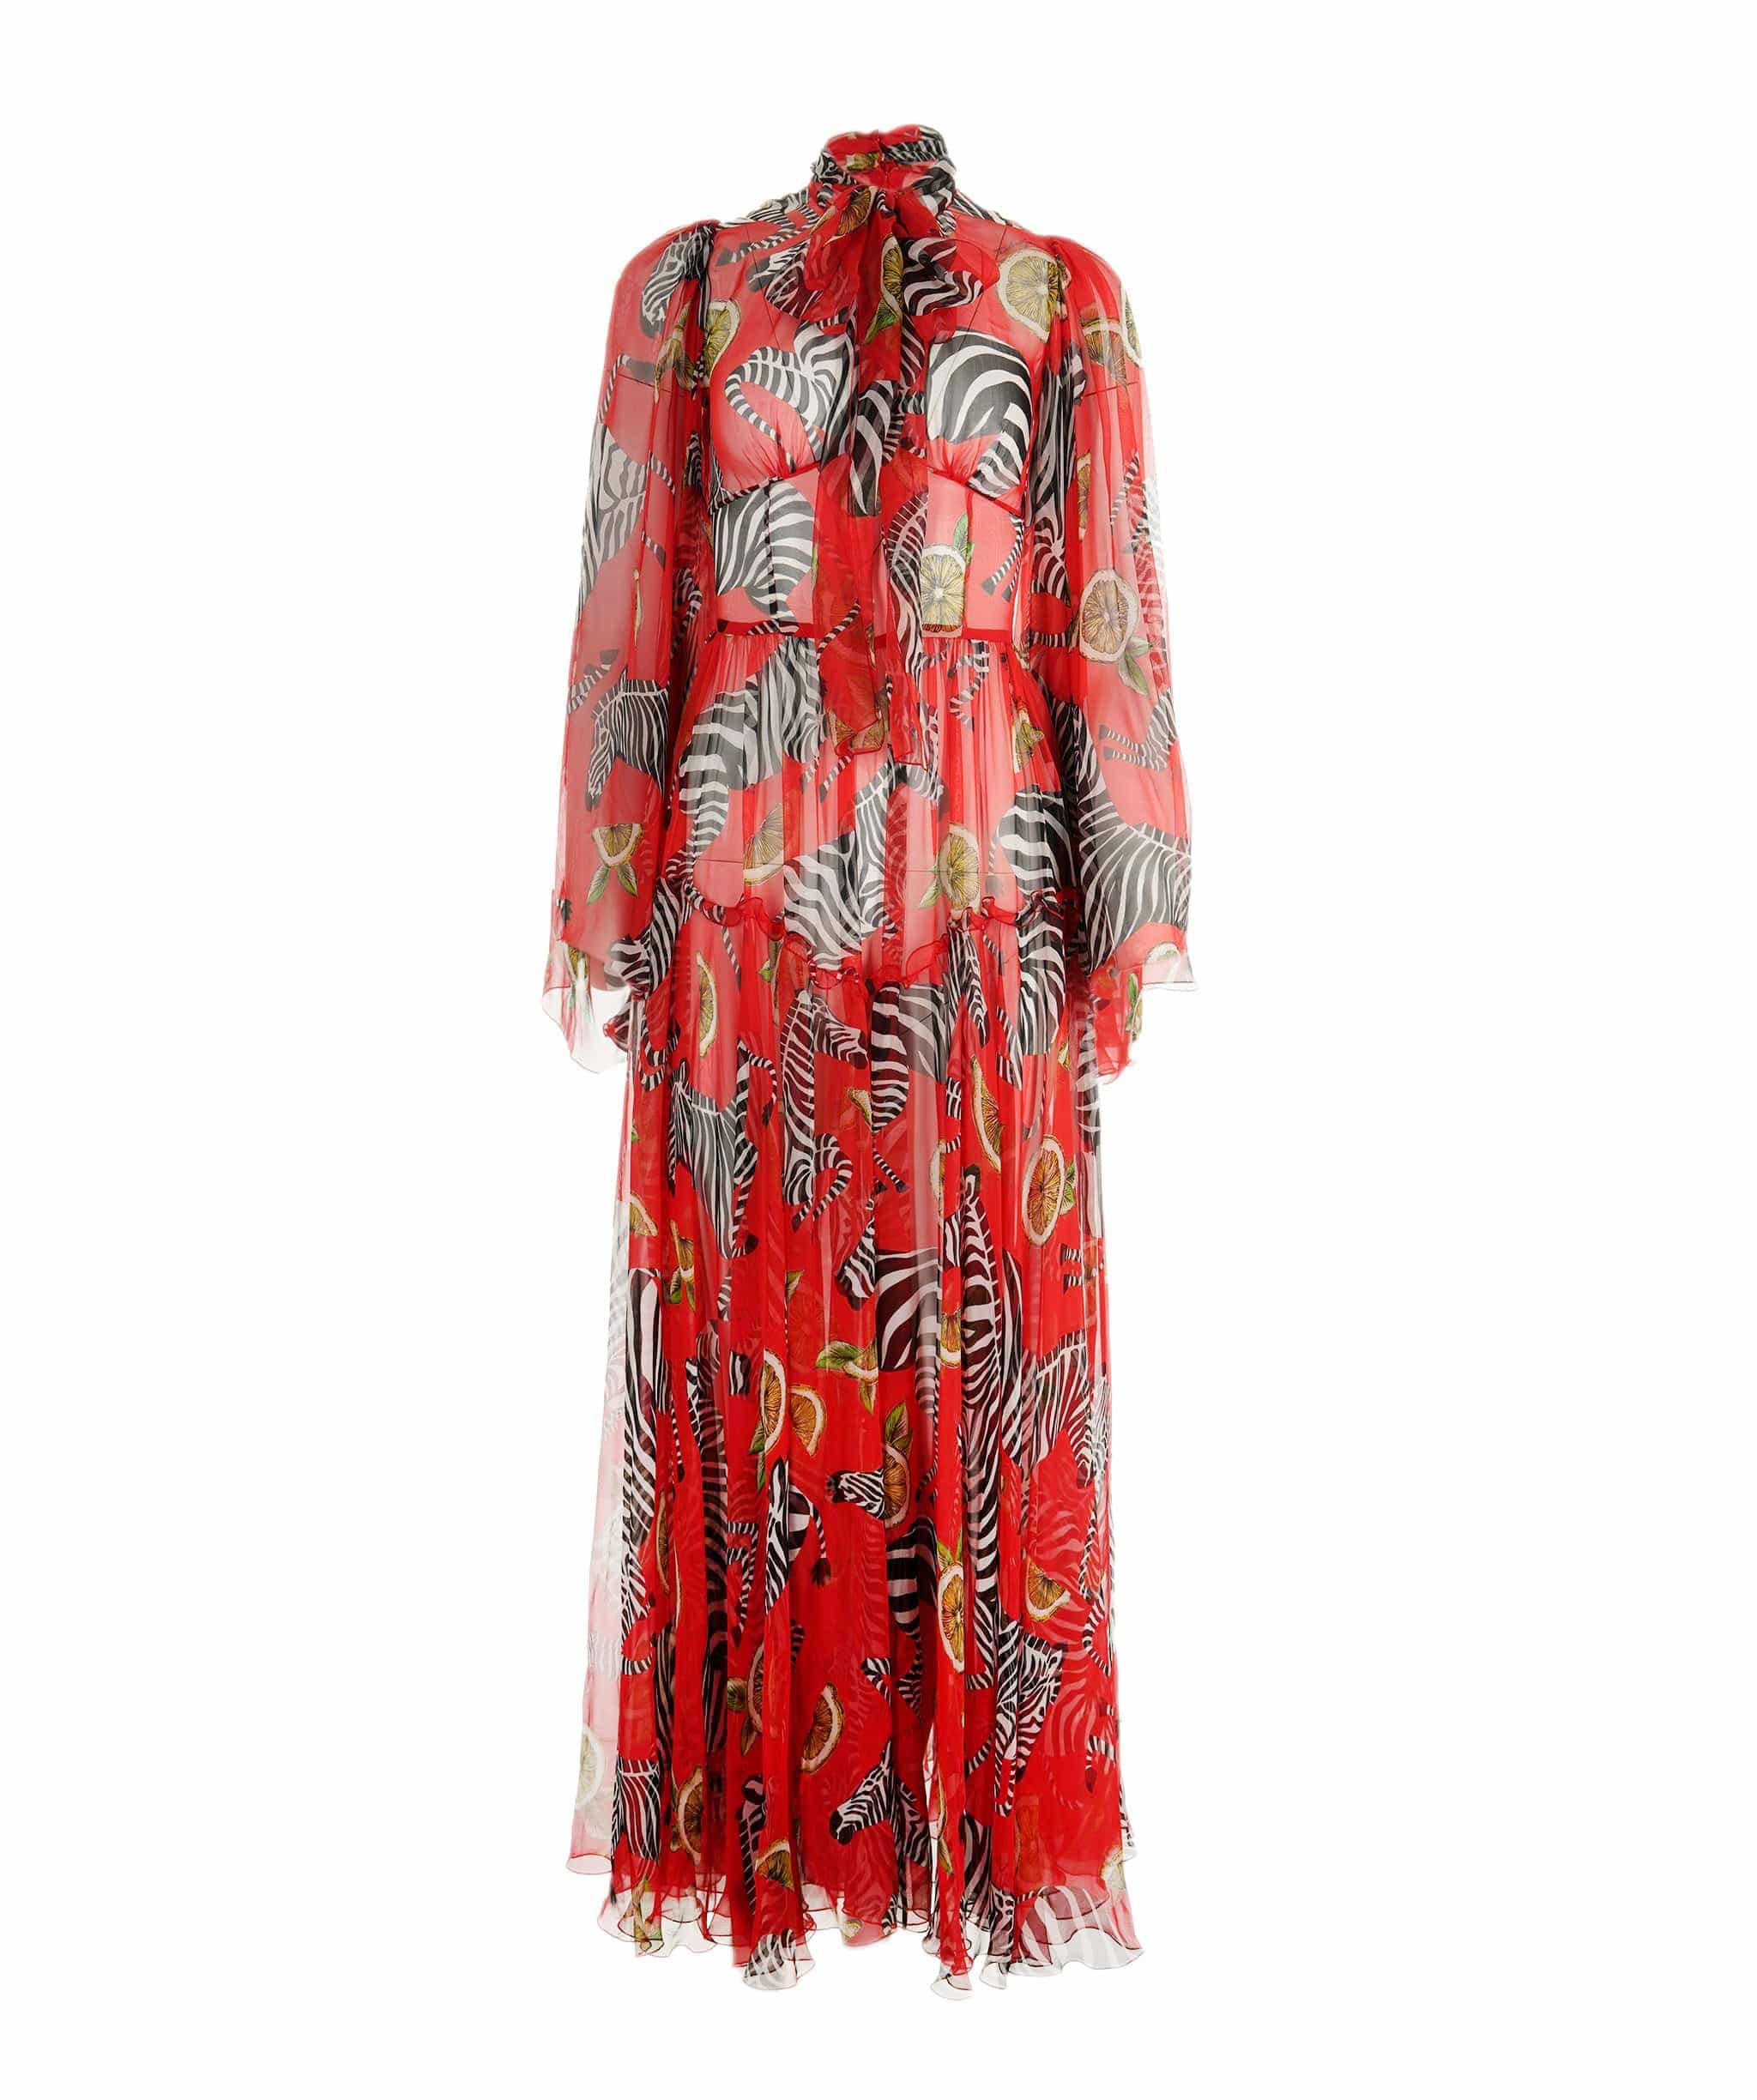 Dolce & Gabbana D&G long dress silk red with zebras IT38 (S to M) AVC1332